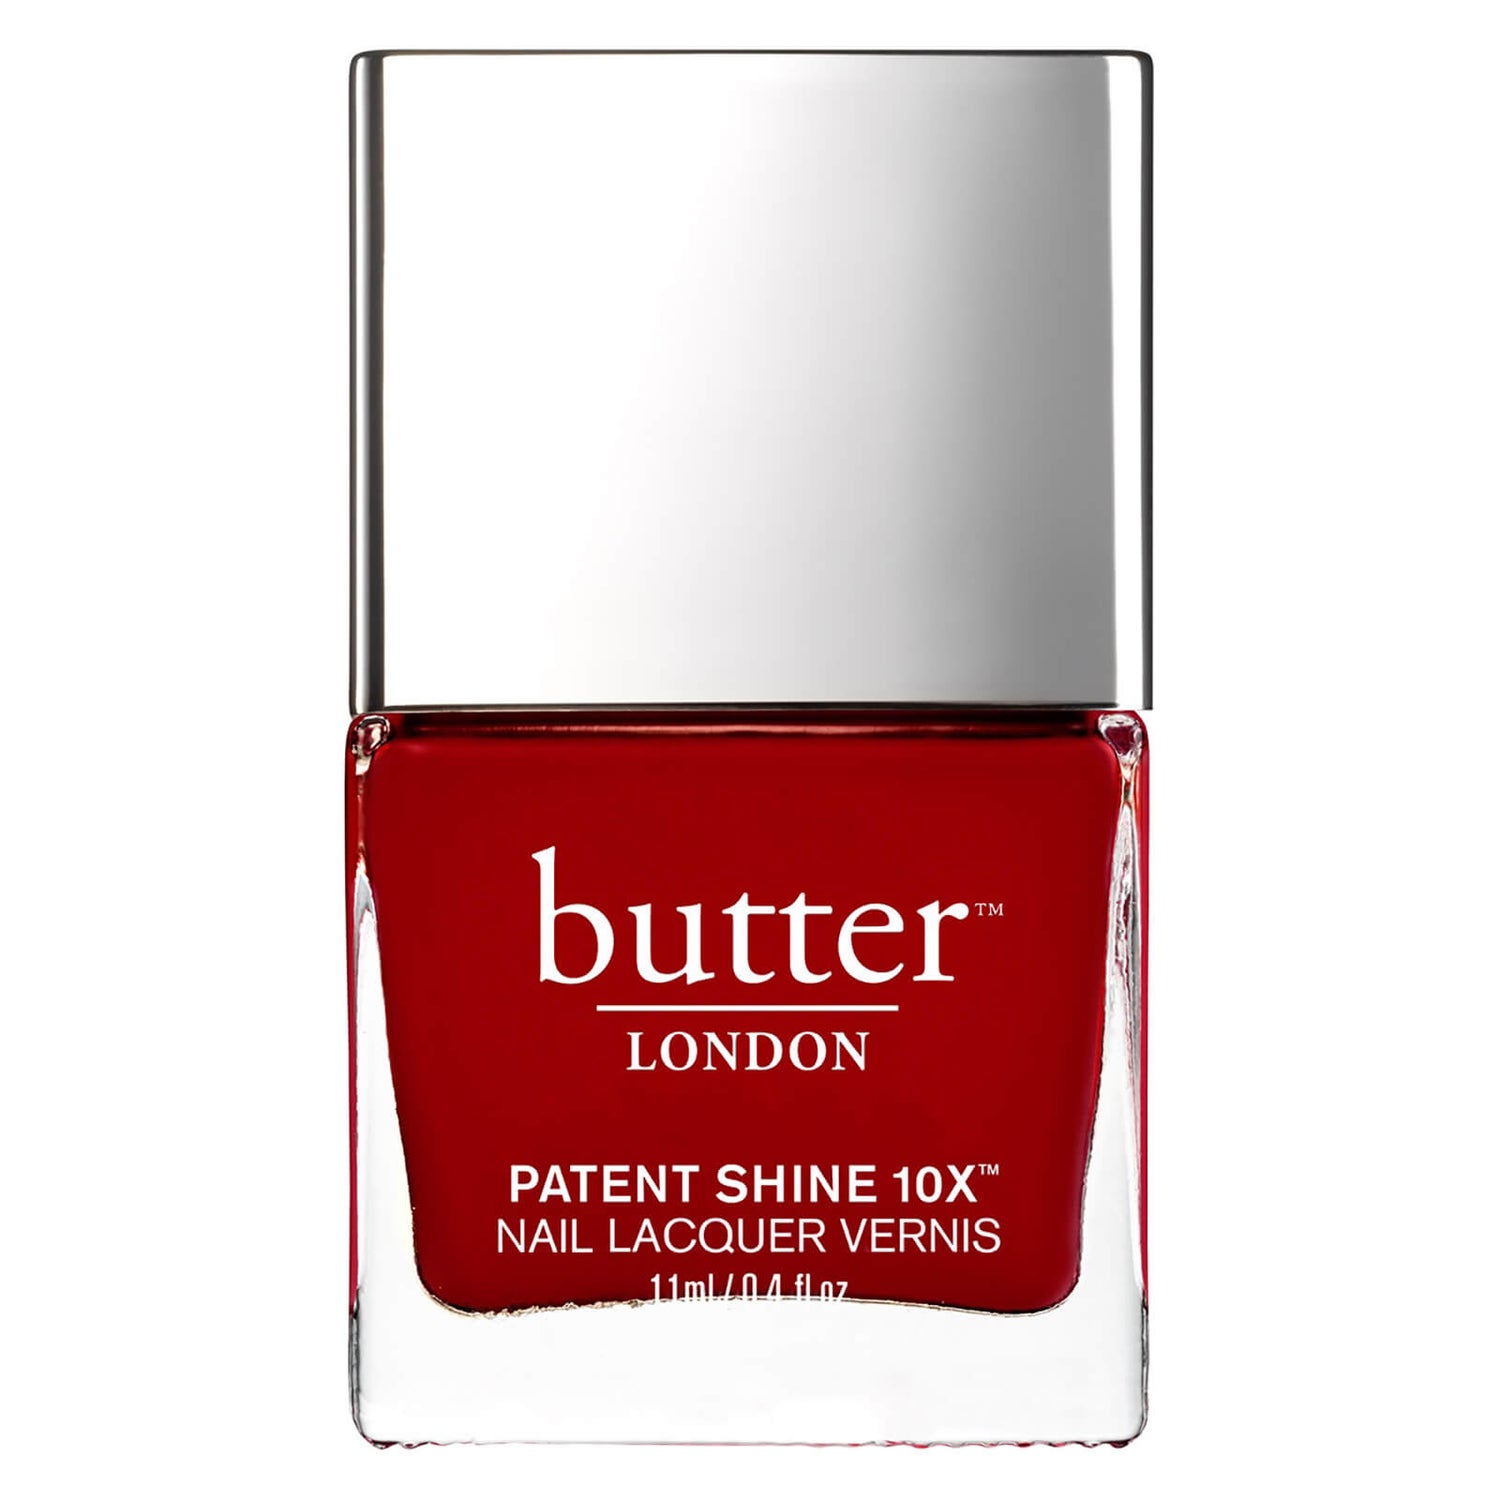 butter LONDON Patent Shine 10X Nail Lacquer 11ml - Her Majesty's Red